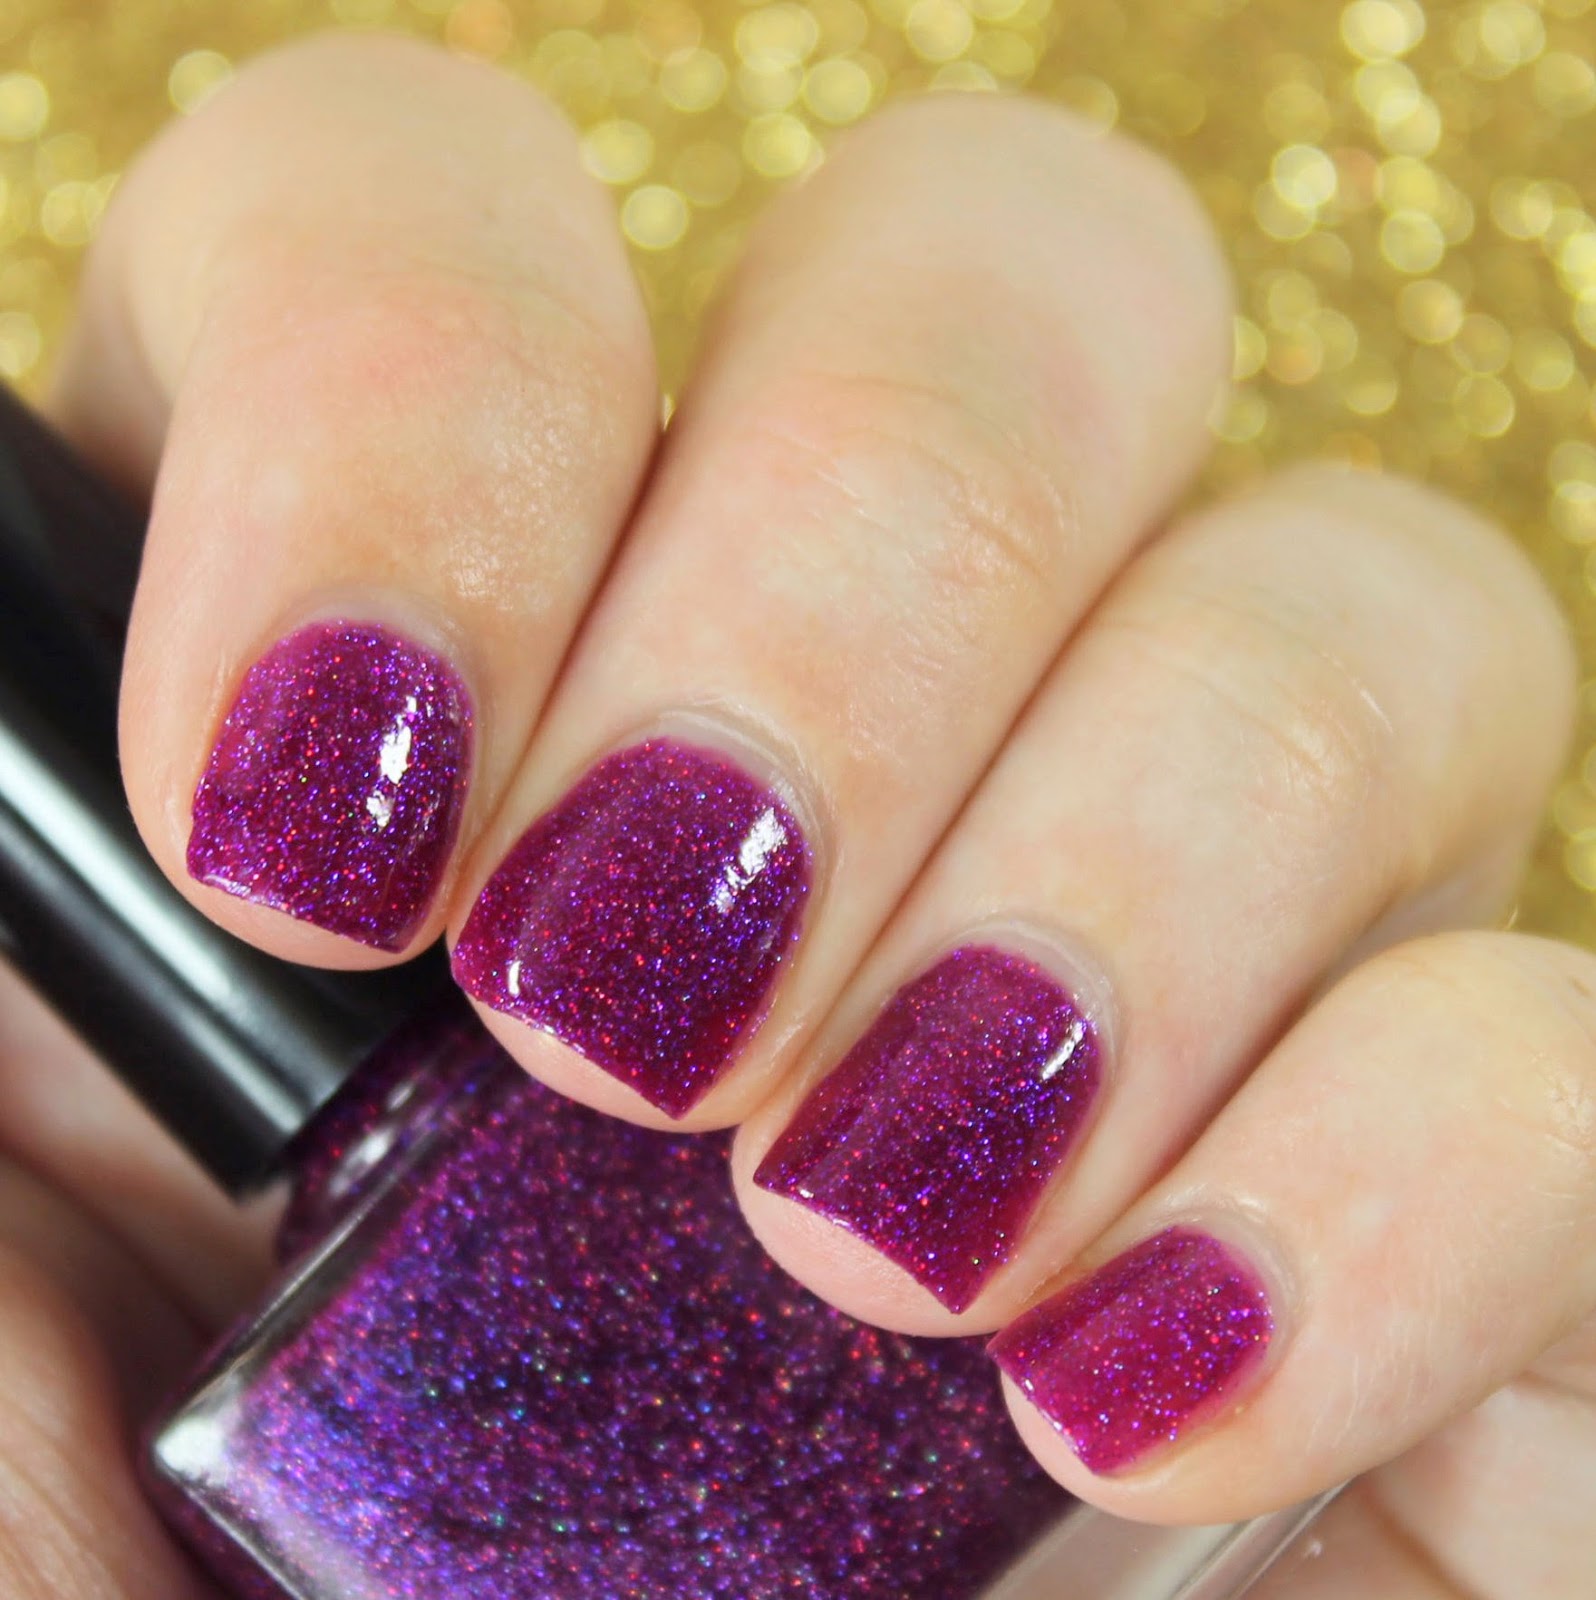 Femme Fatale Cosmetics Touch of Madness nail polish swatches & review